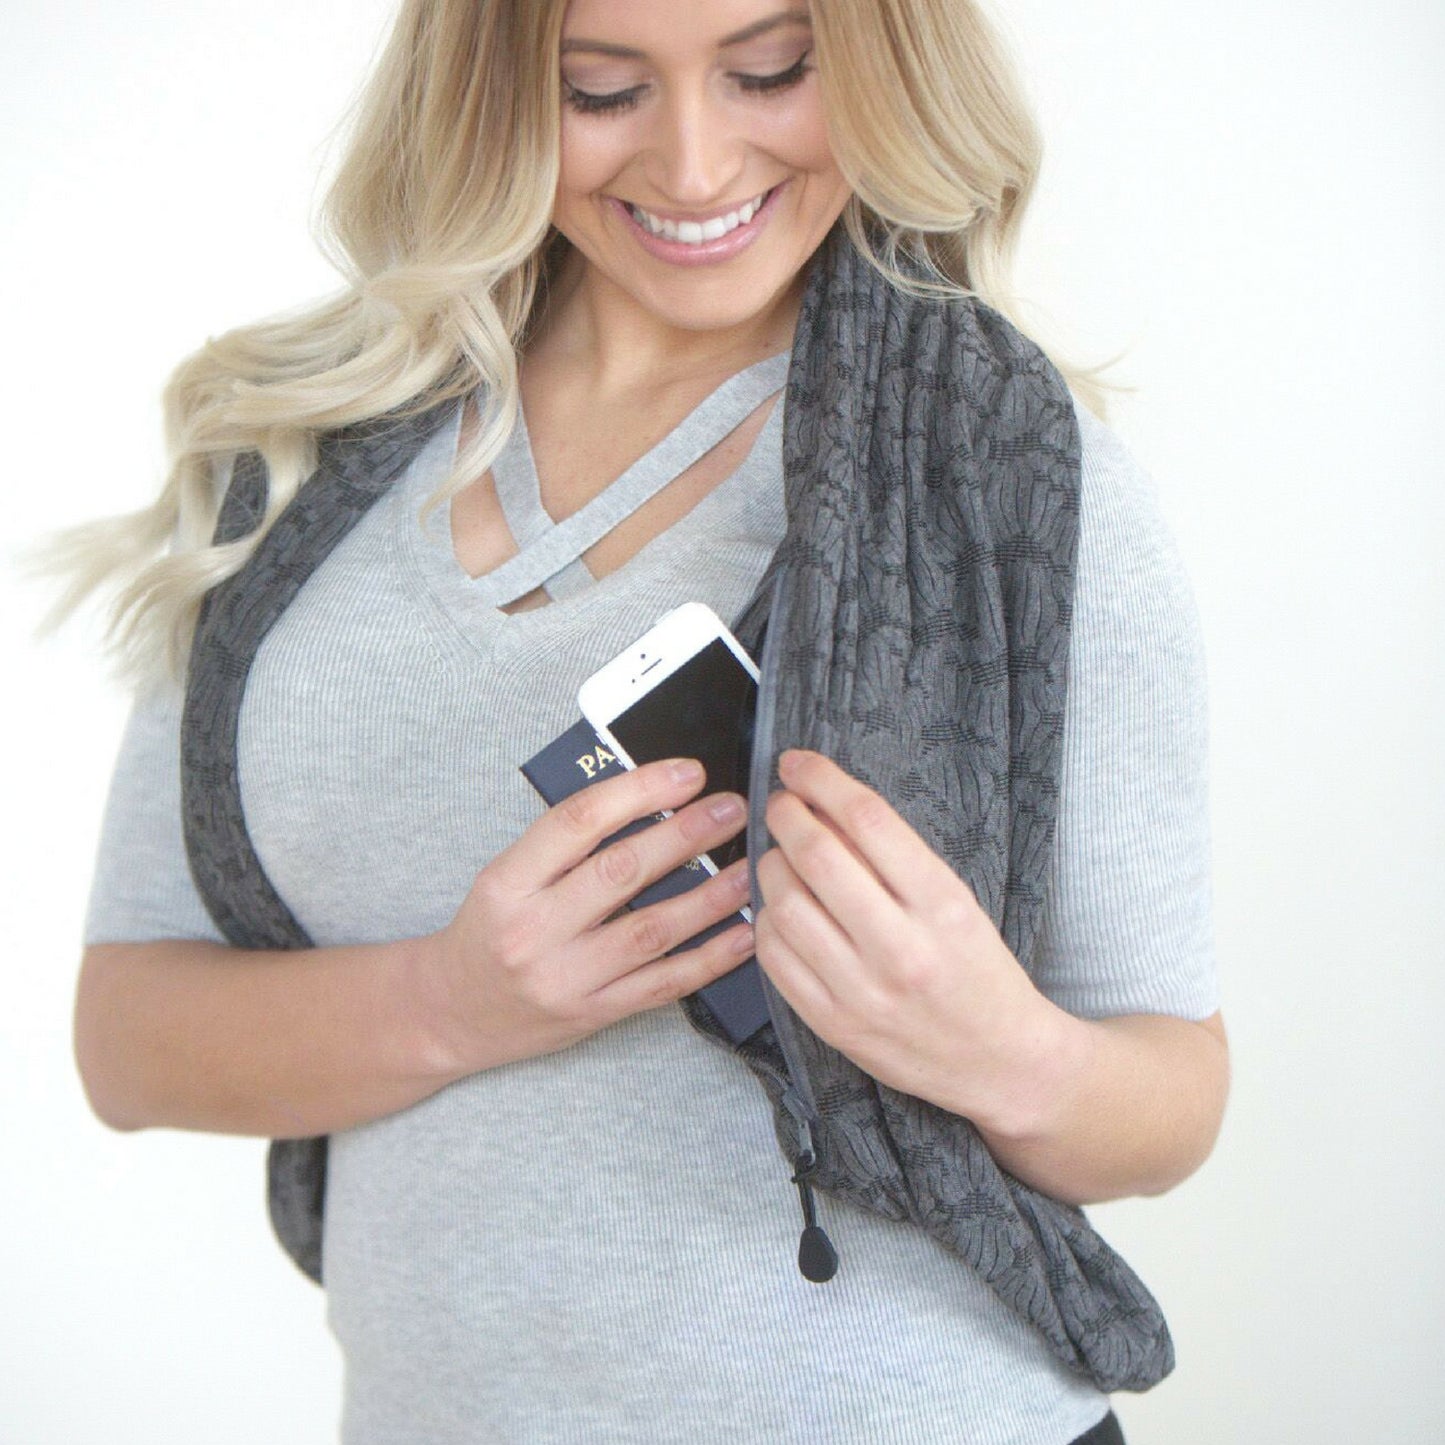  SHOLDIT Convertible Infinity Scarf with Pocket Mystic Grey Shrug